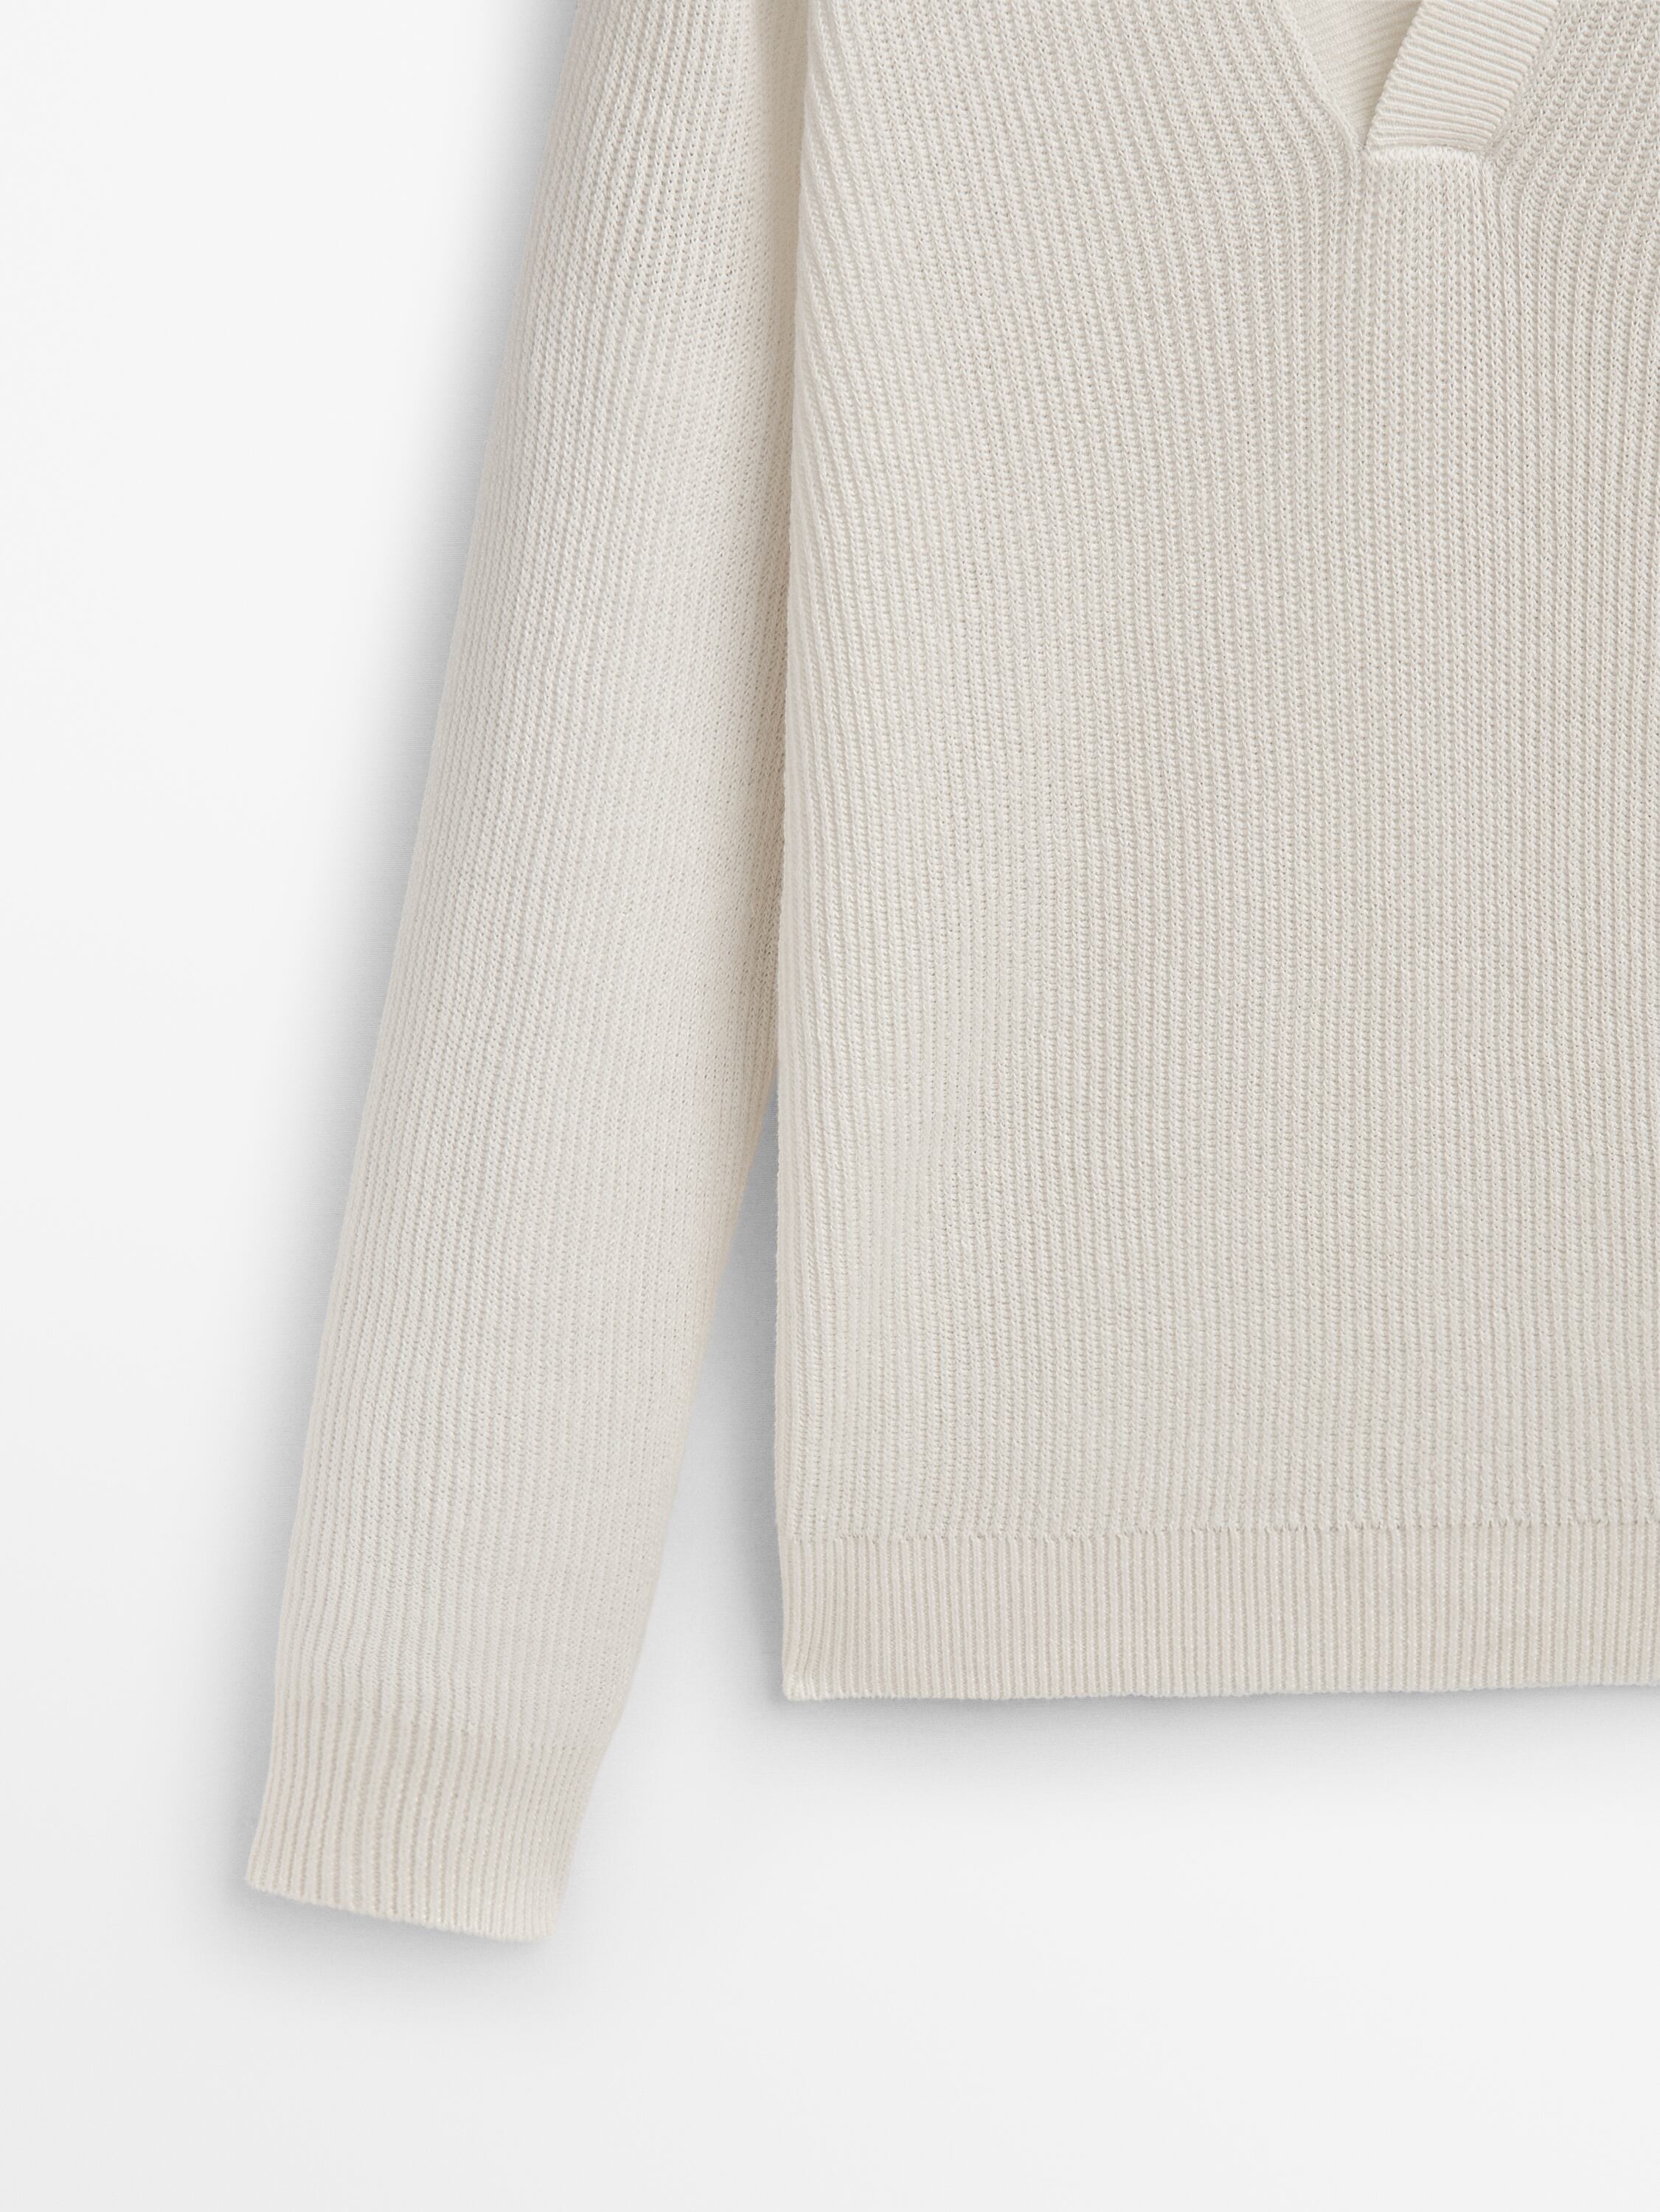 Textured knit sweater with a polo collar - Limited Edition